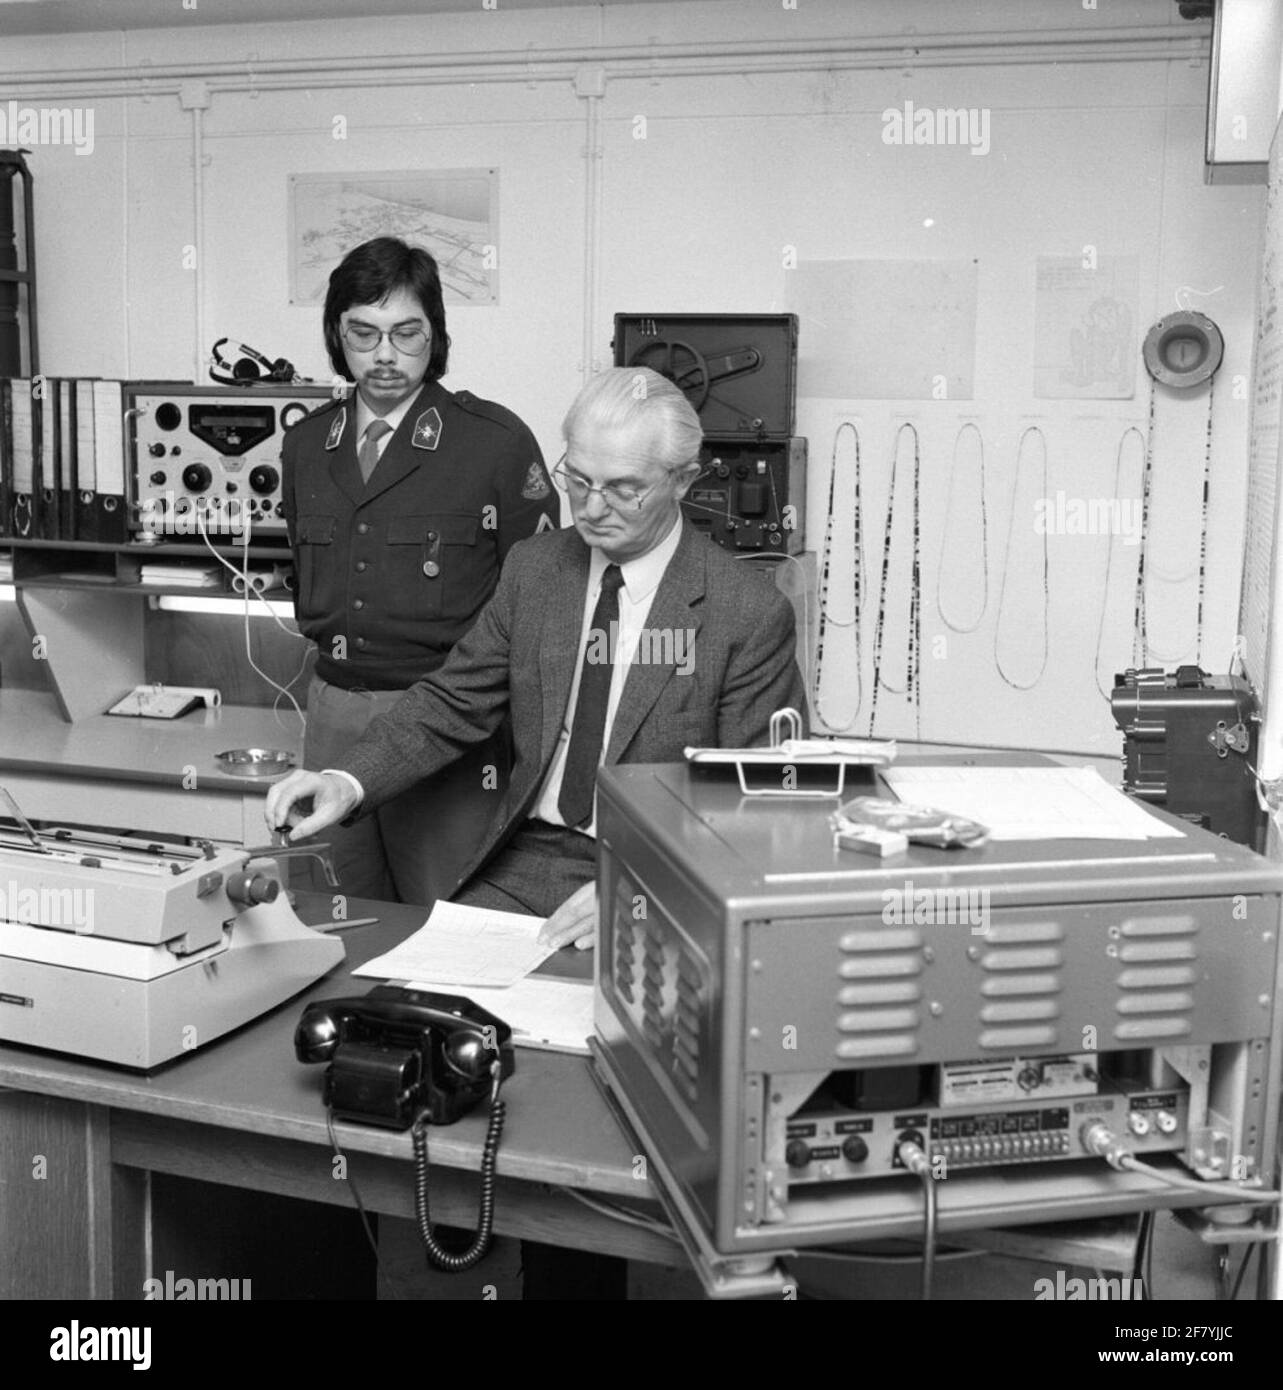 Shipping from the last telegram to the force in Suriname by the Chef Radiokamer, Mr Hulsebosch, from the radio room in the bunker at the Princess Julianakanne. Stock Photo